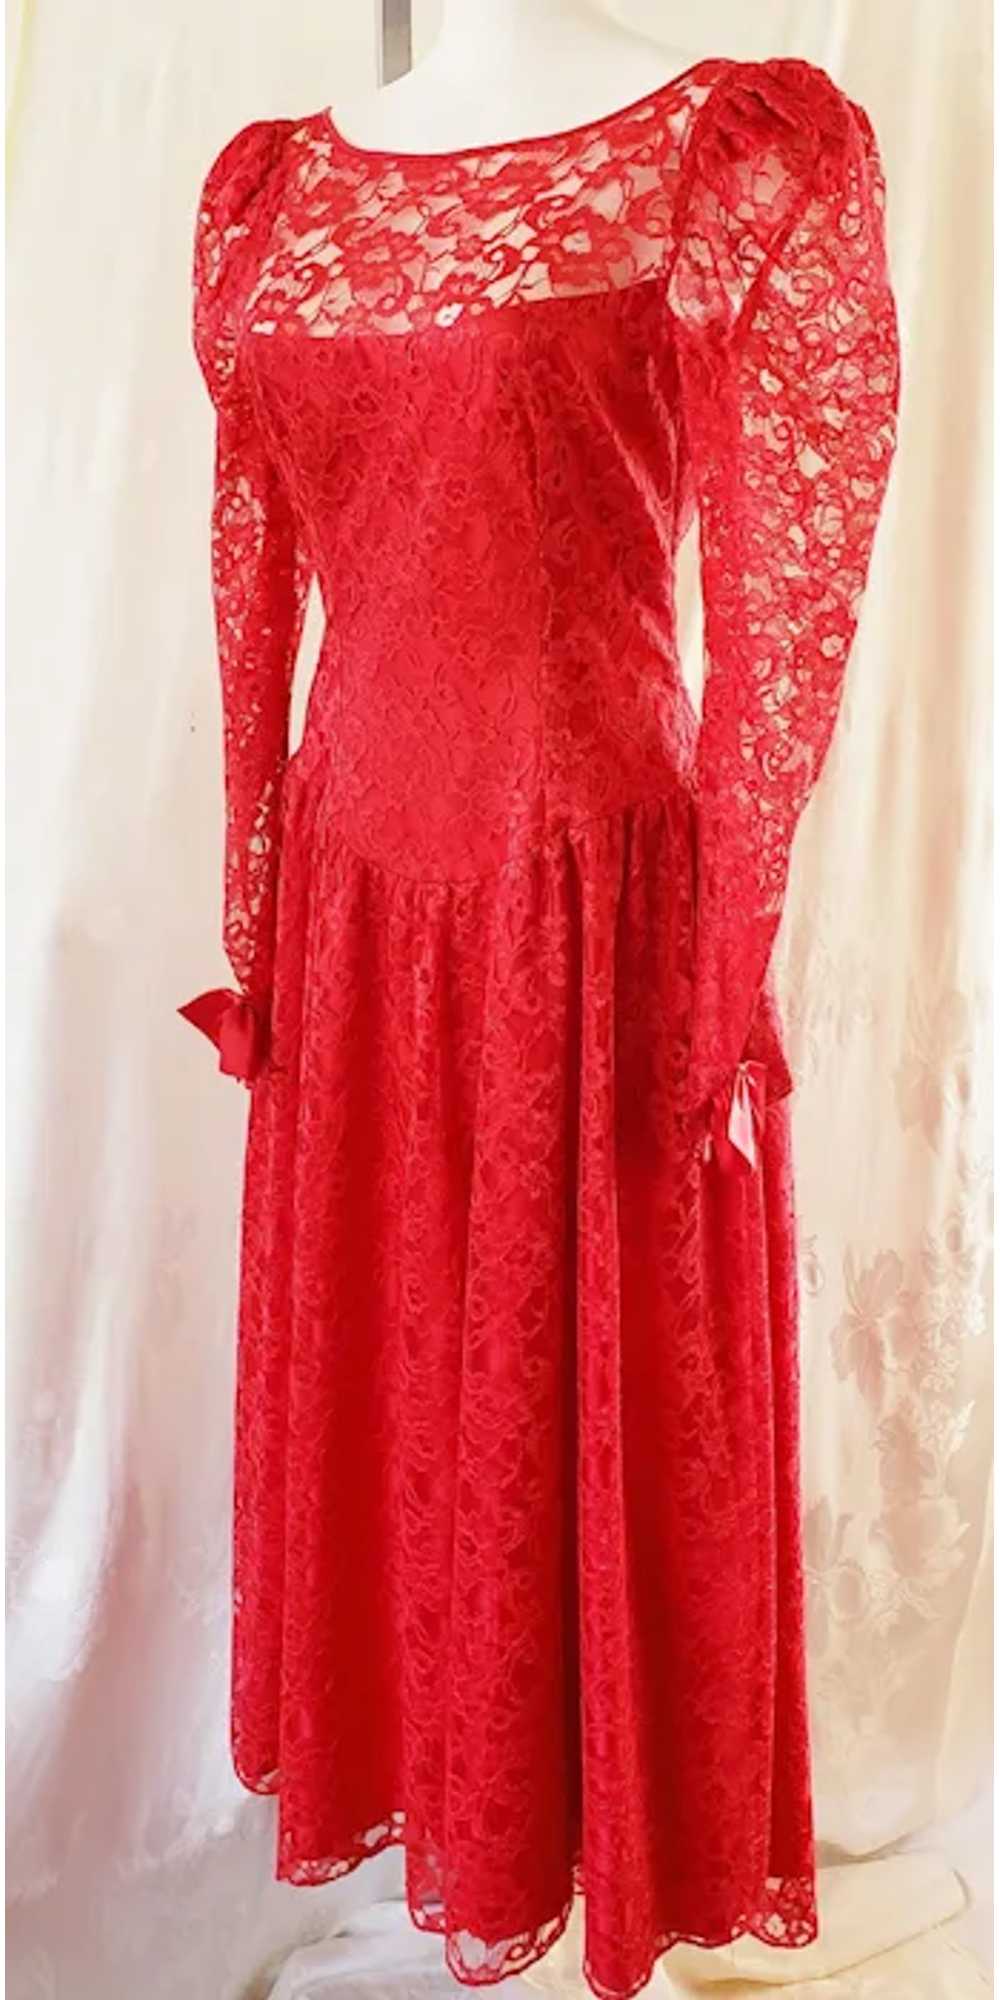 Red Lace Dreamy Gown - image 3